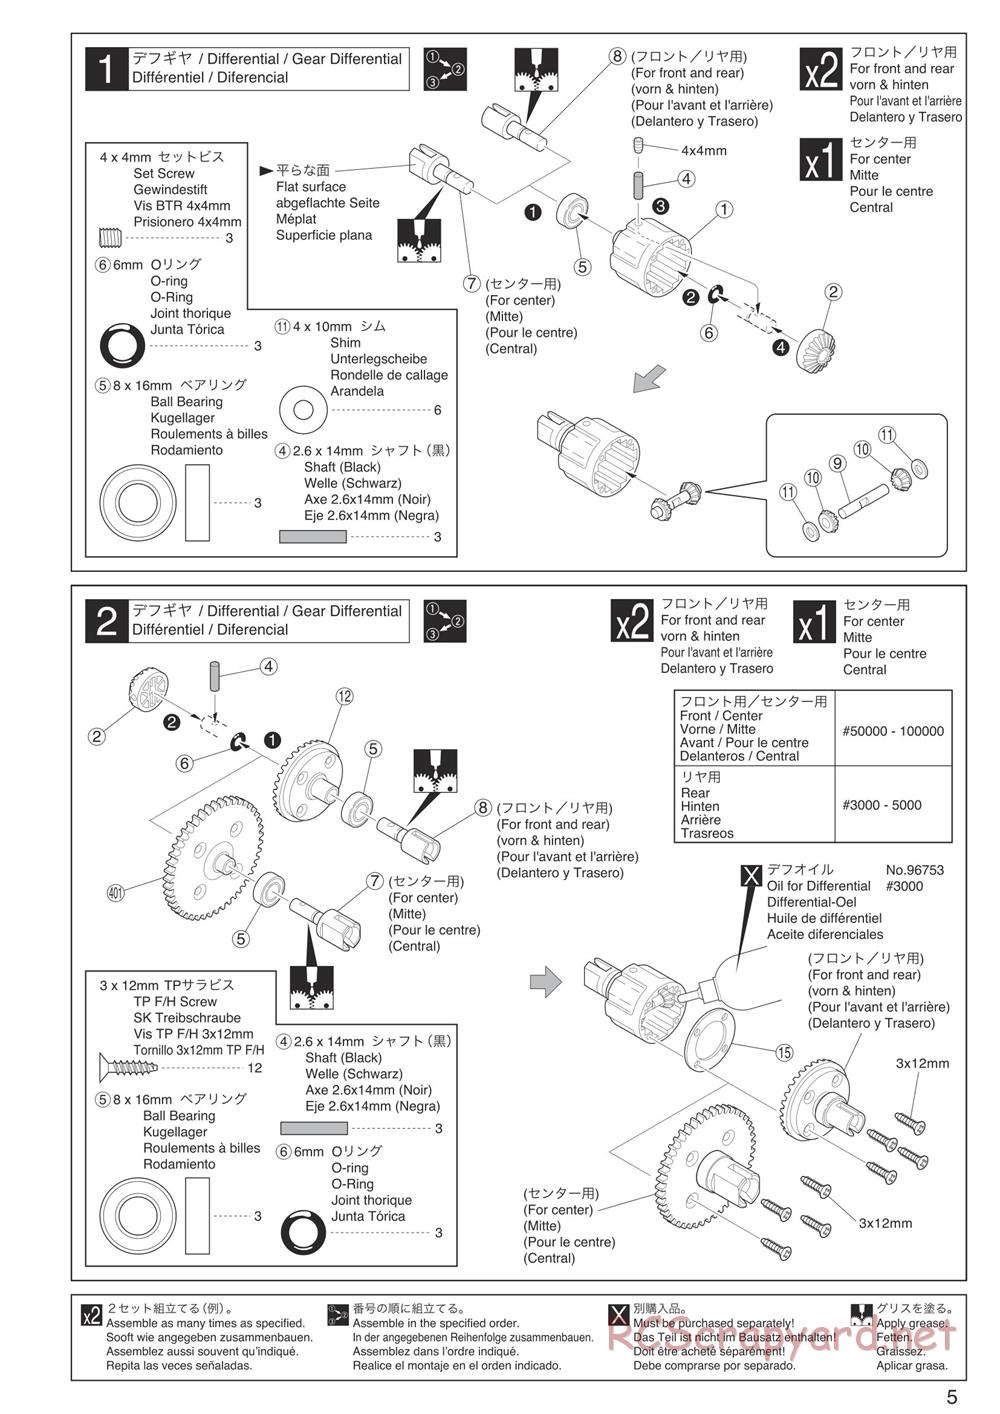 Kyosho - Inferno Neo Race Spec - Manual - Page 5